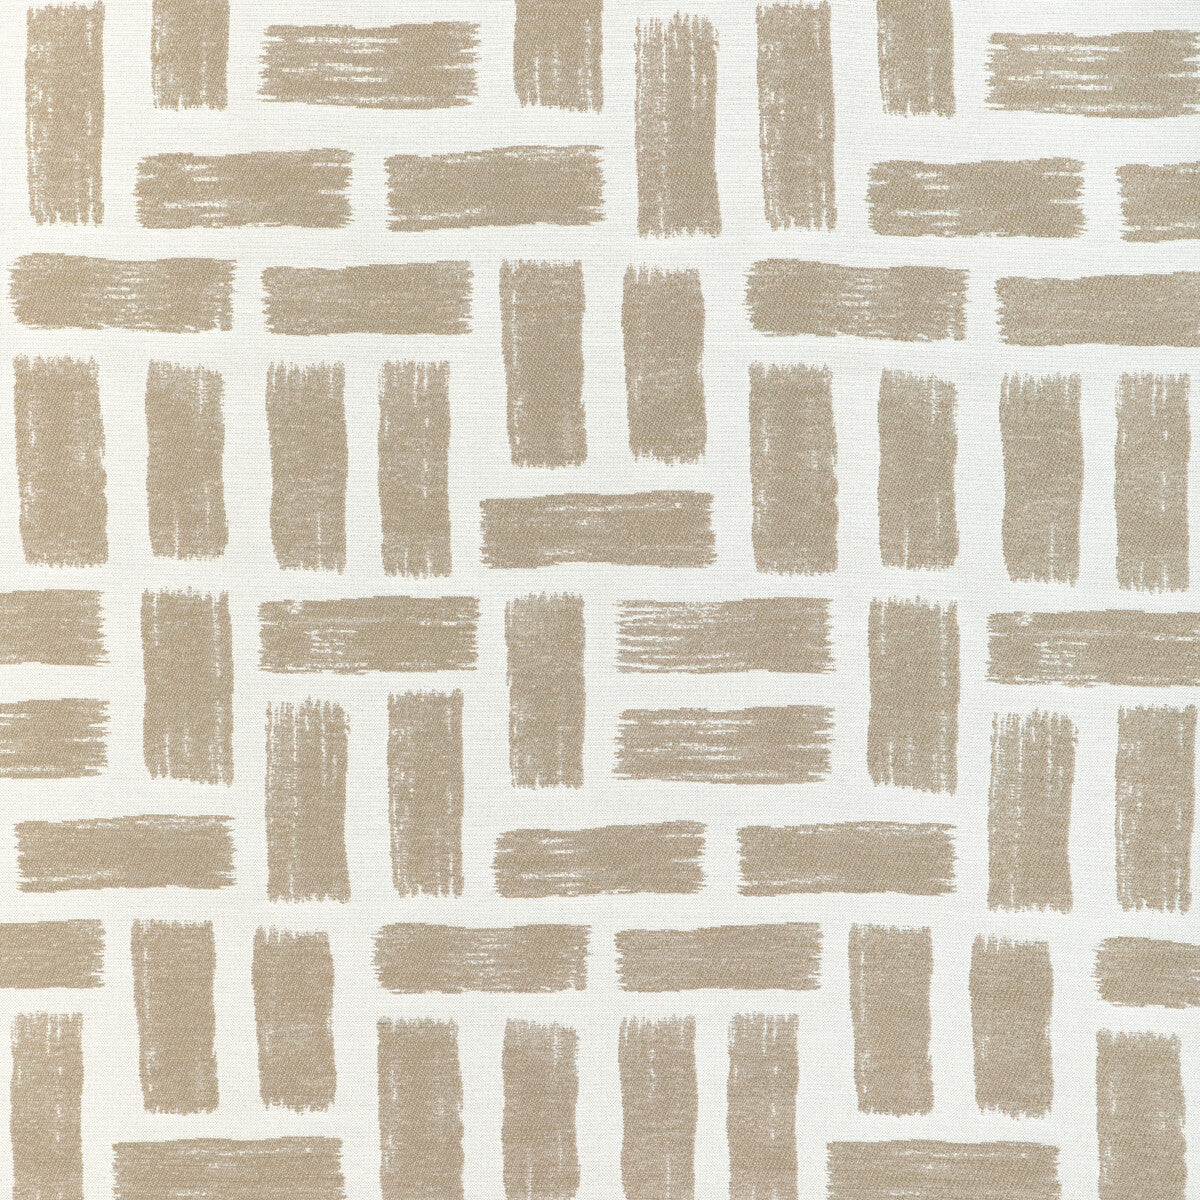 Brickwork fabric in taupe color - pattern 37055.106.0 - by Kravet Design in the Thom Filicia Latitude collection